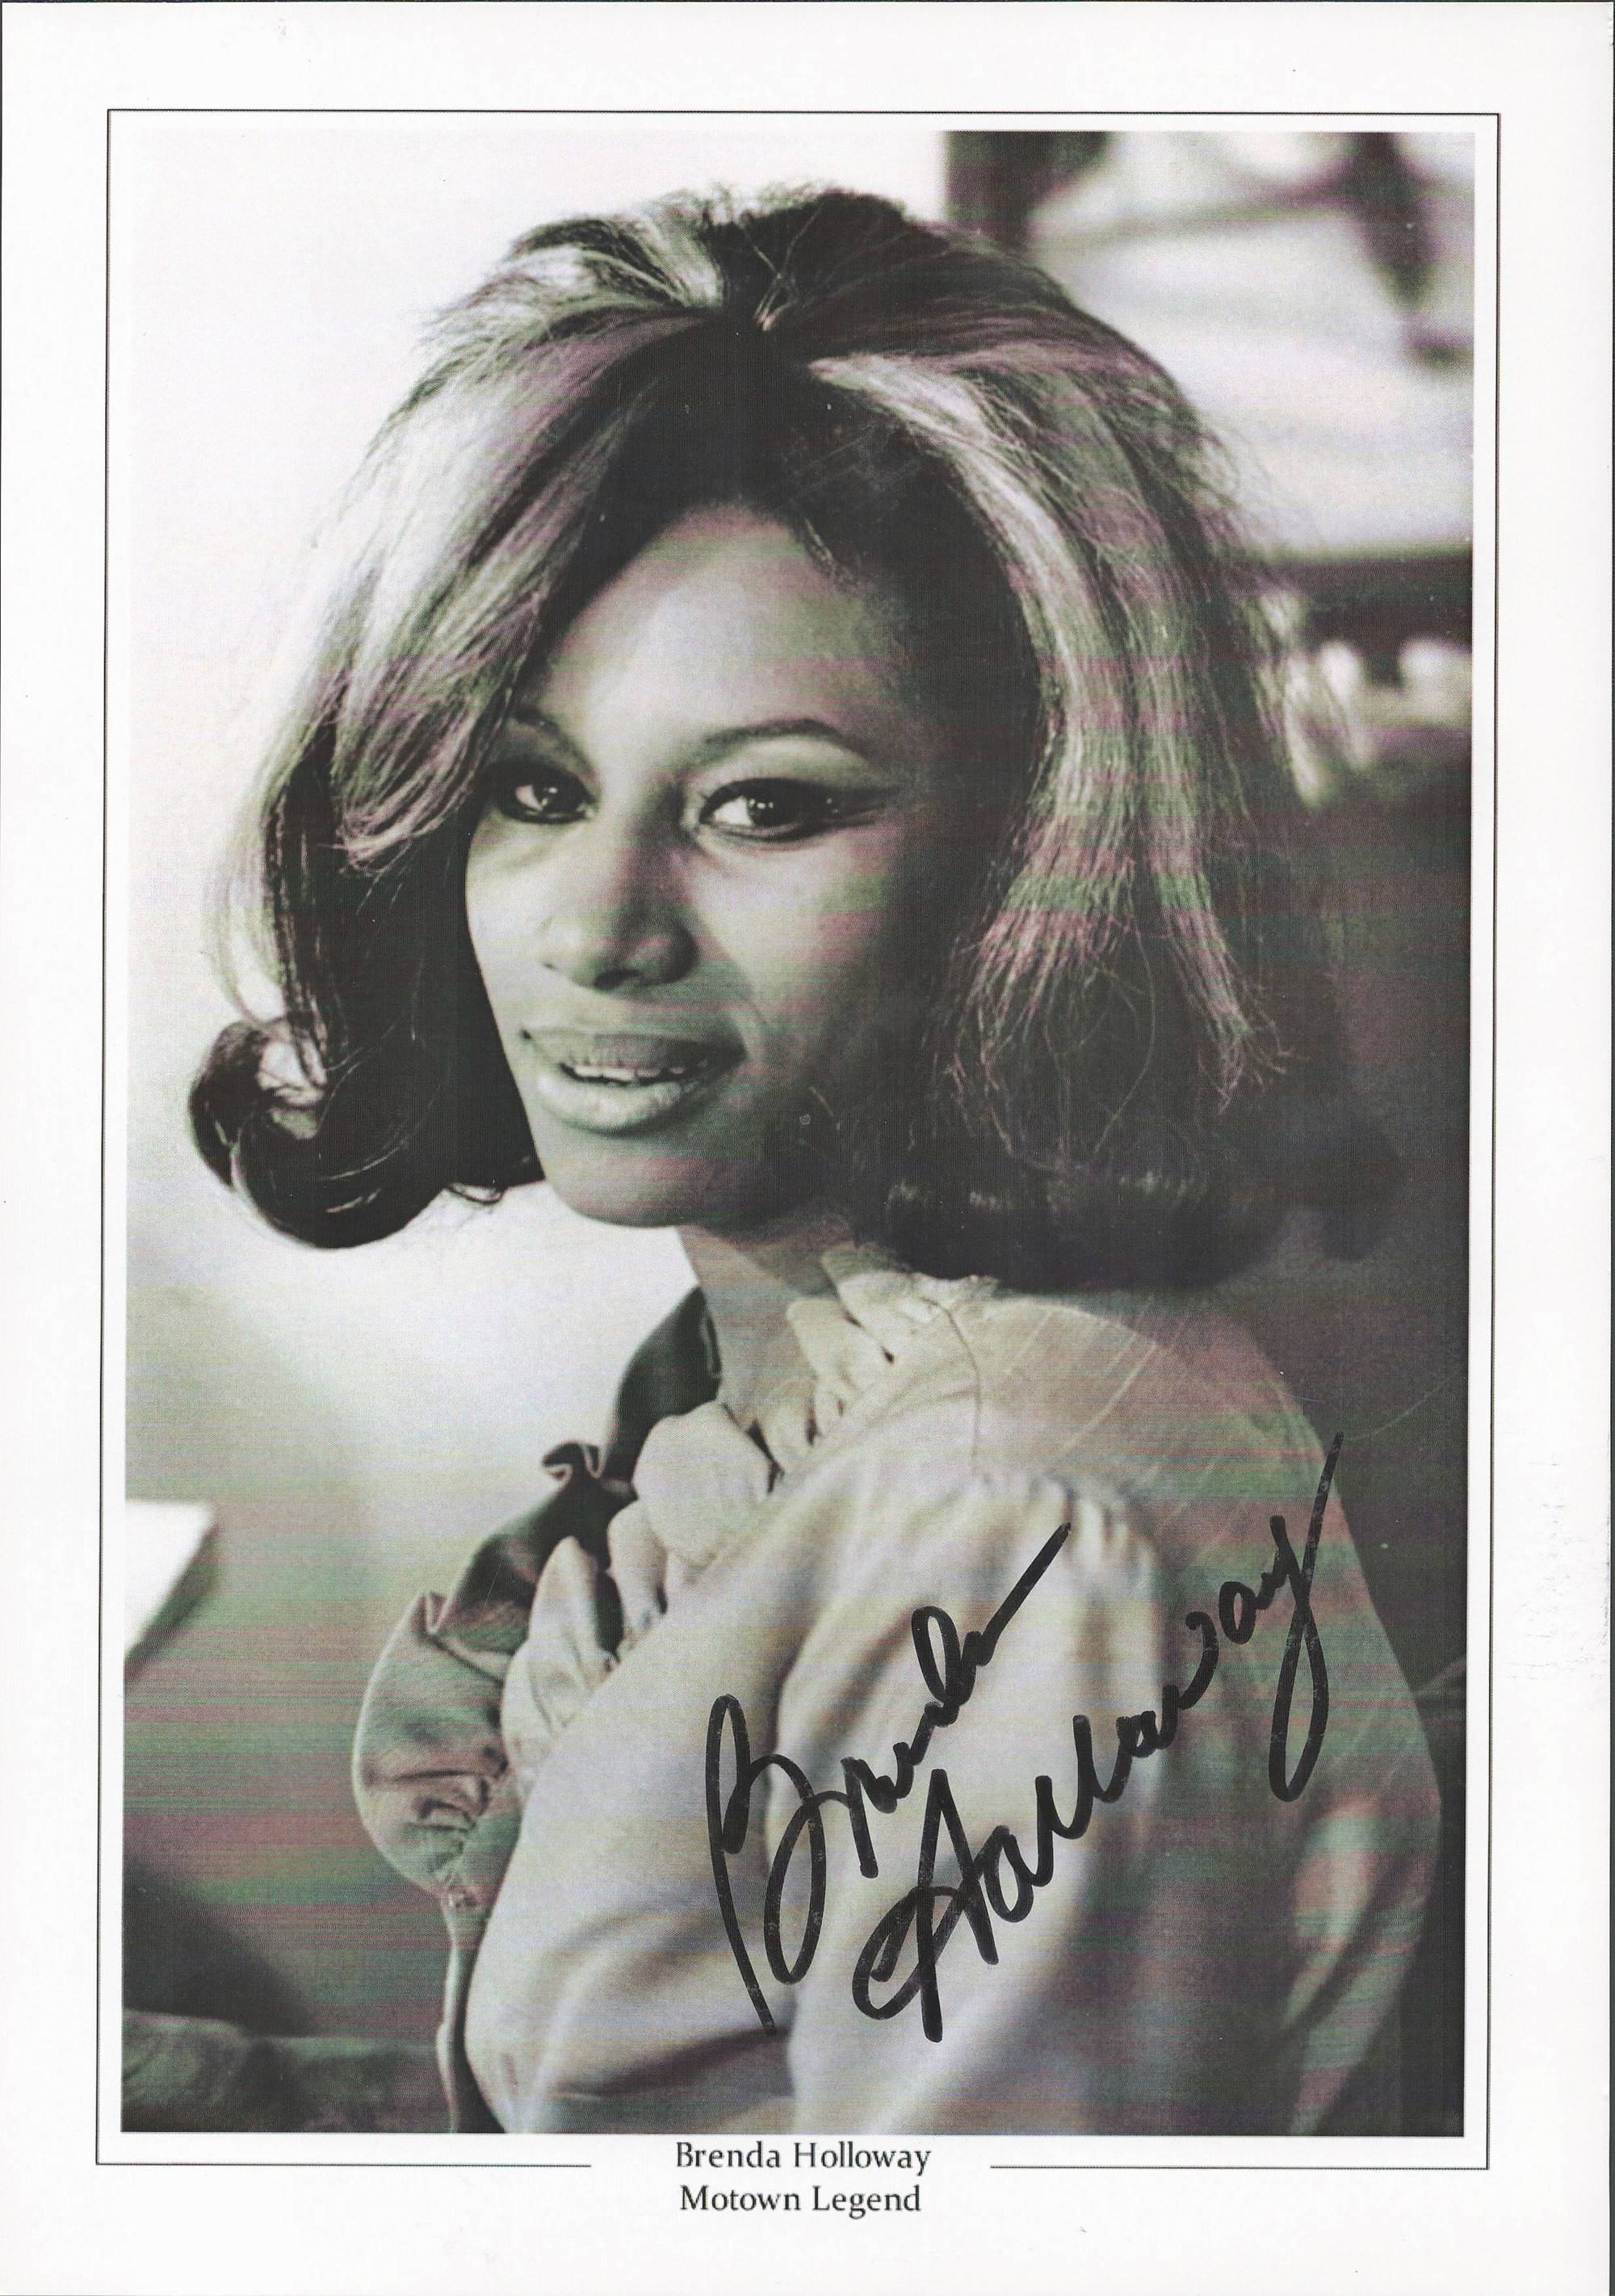 Music, Brenda Holloway signed 12x8 black and white photograph. Holloway (born June 26, 1946) is an